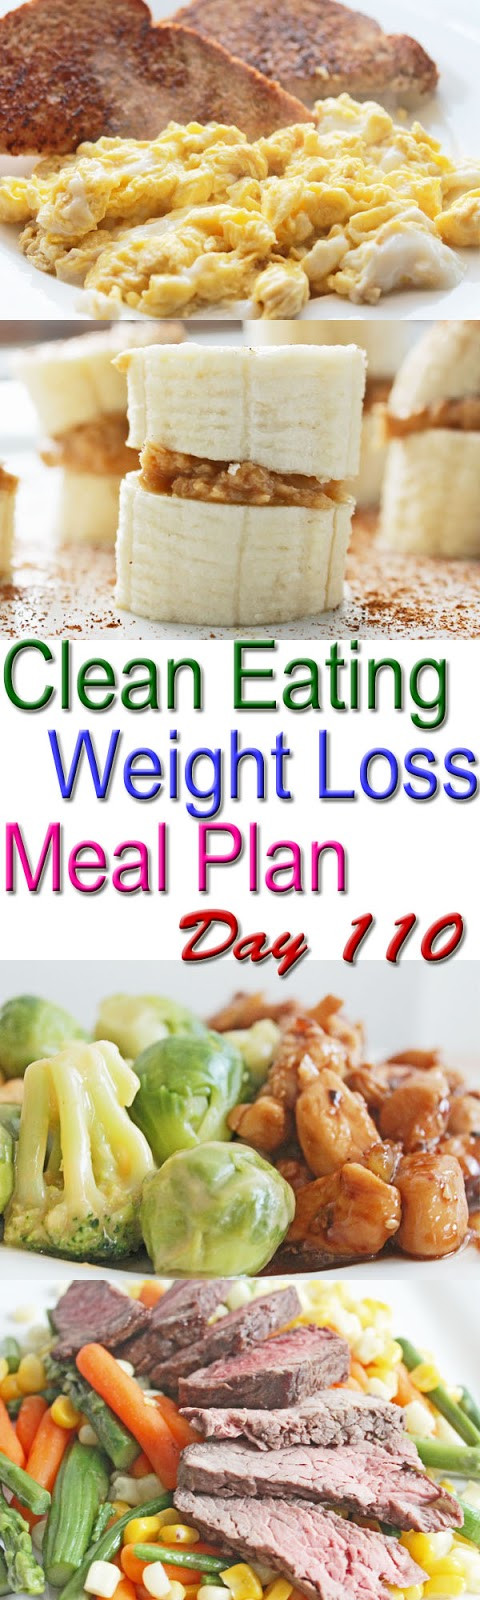 Simple Clean Eating Meal Plans
 Clean Eating Weight Loss Meal Plan 110